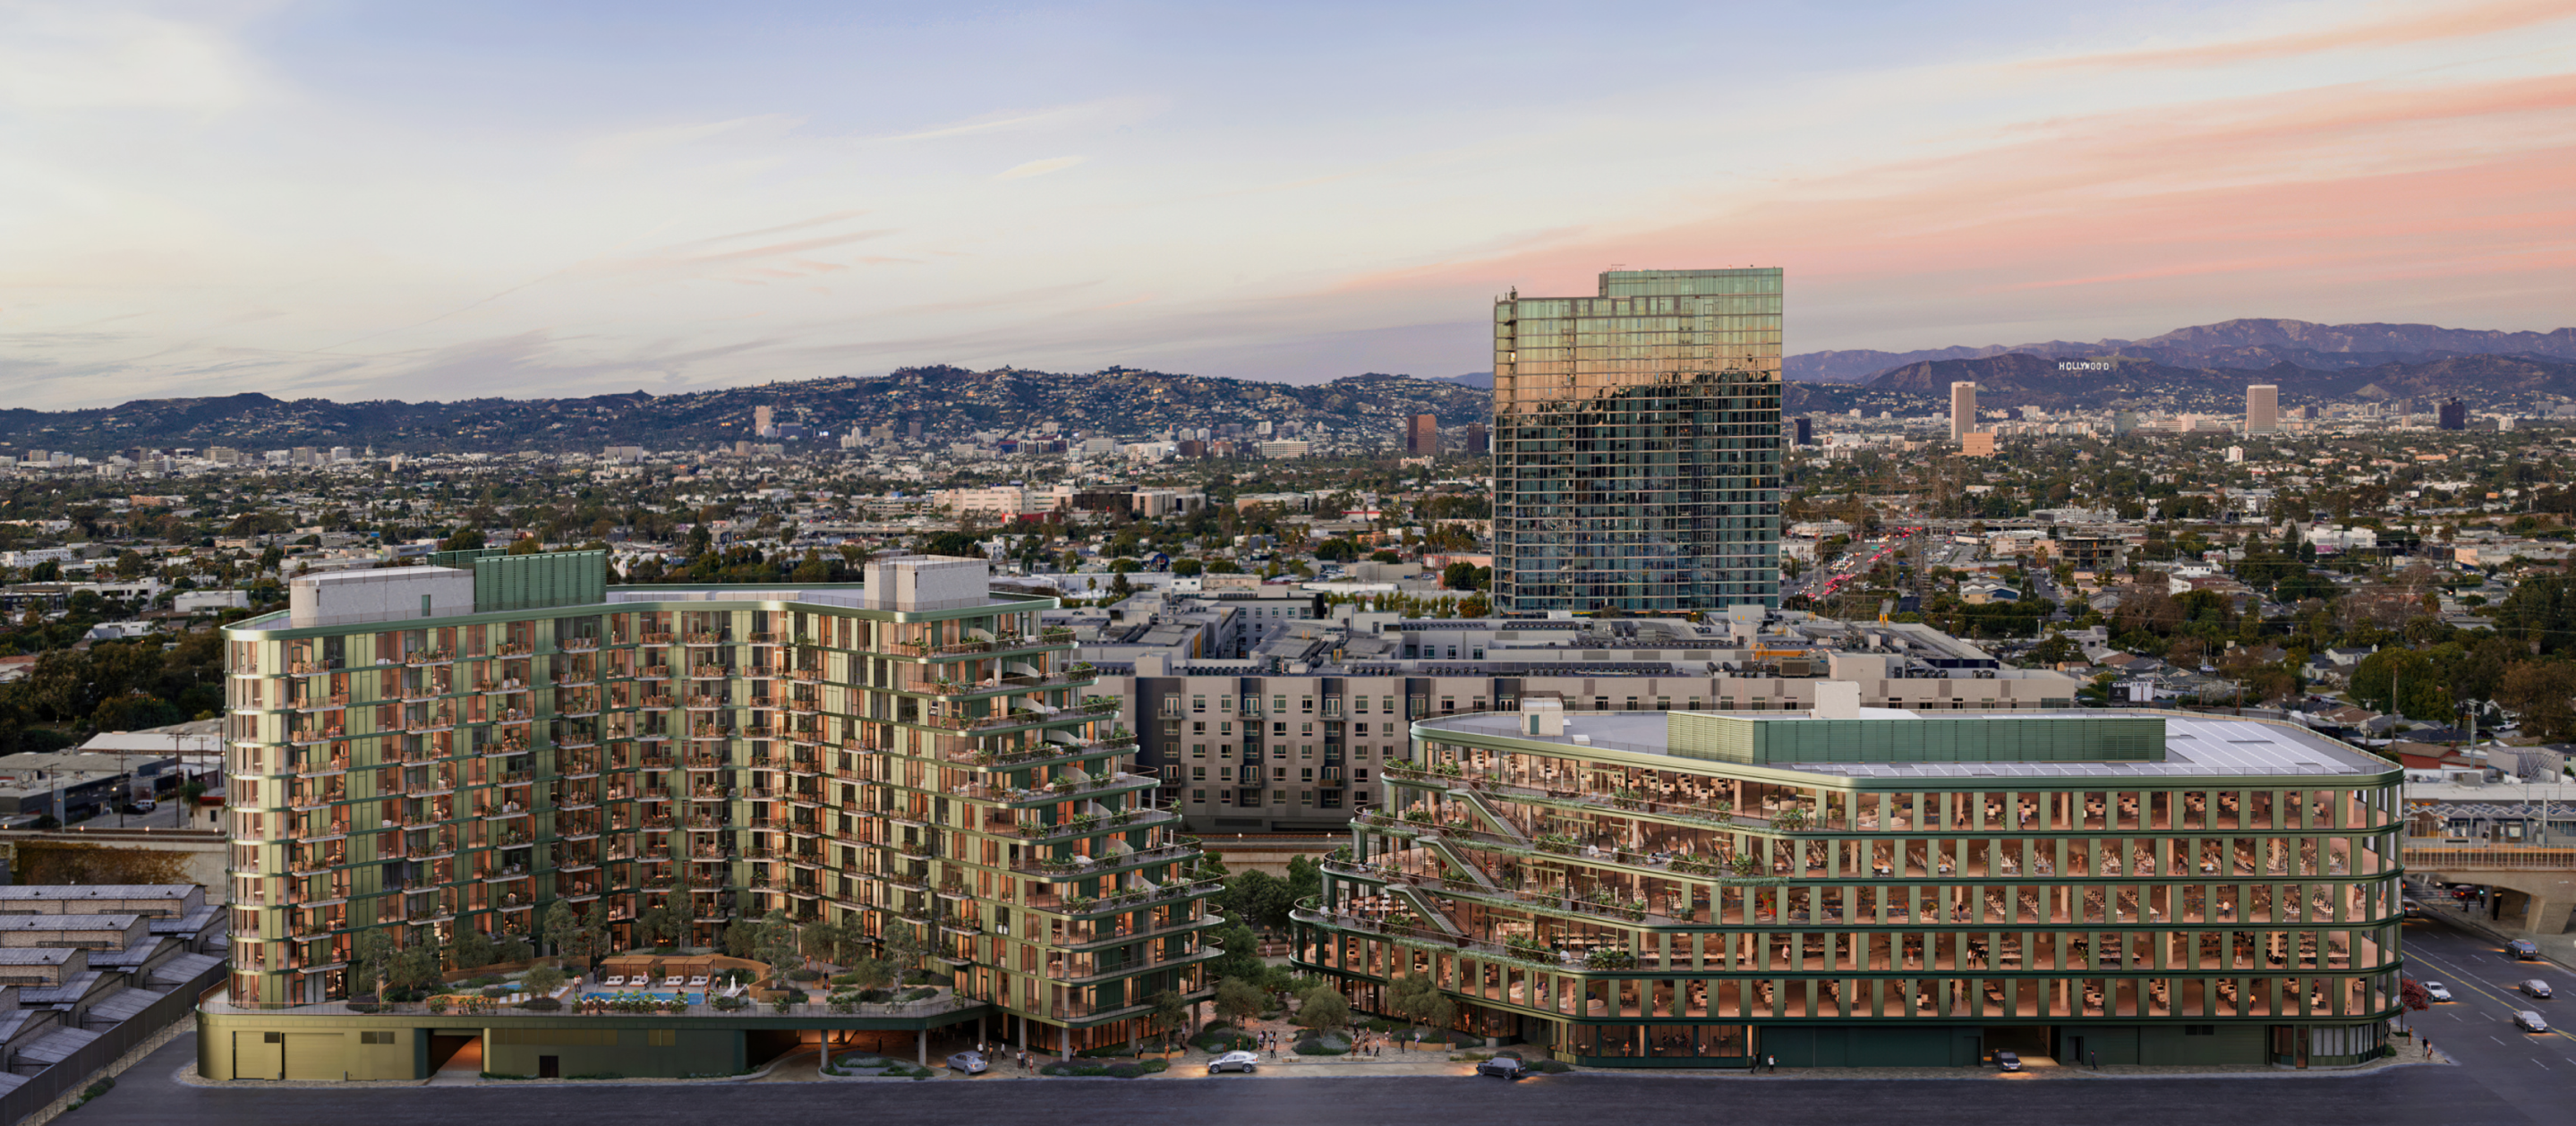 Habitat's mixed-use campus with apartment building on left and creative office building on right and extnsive LA views beyond